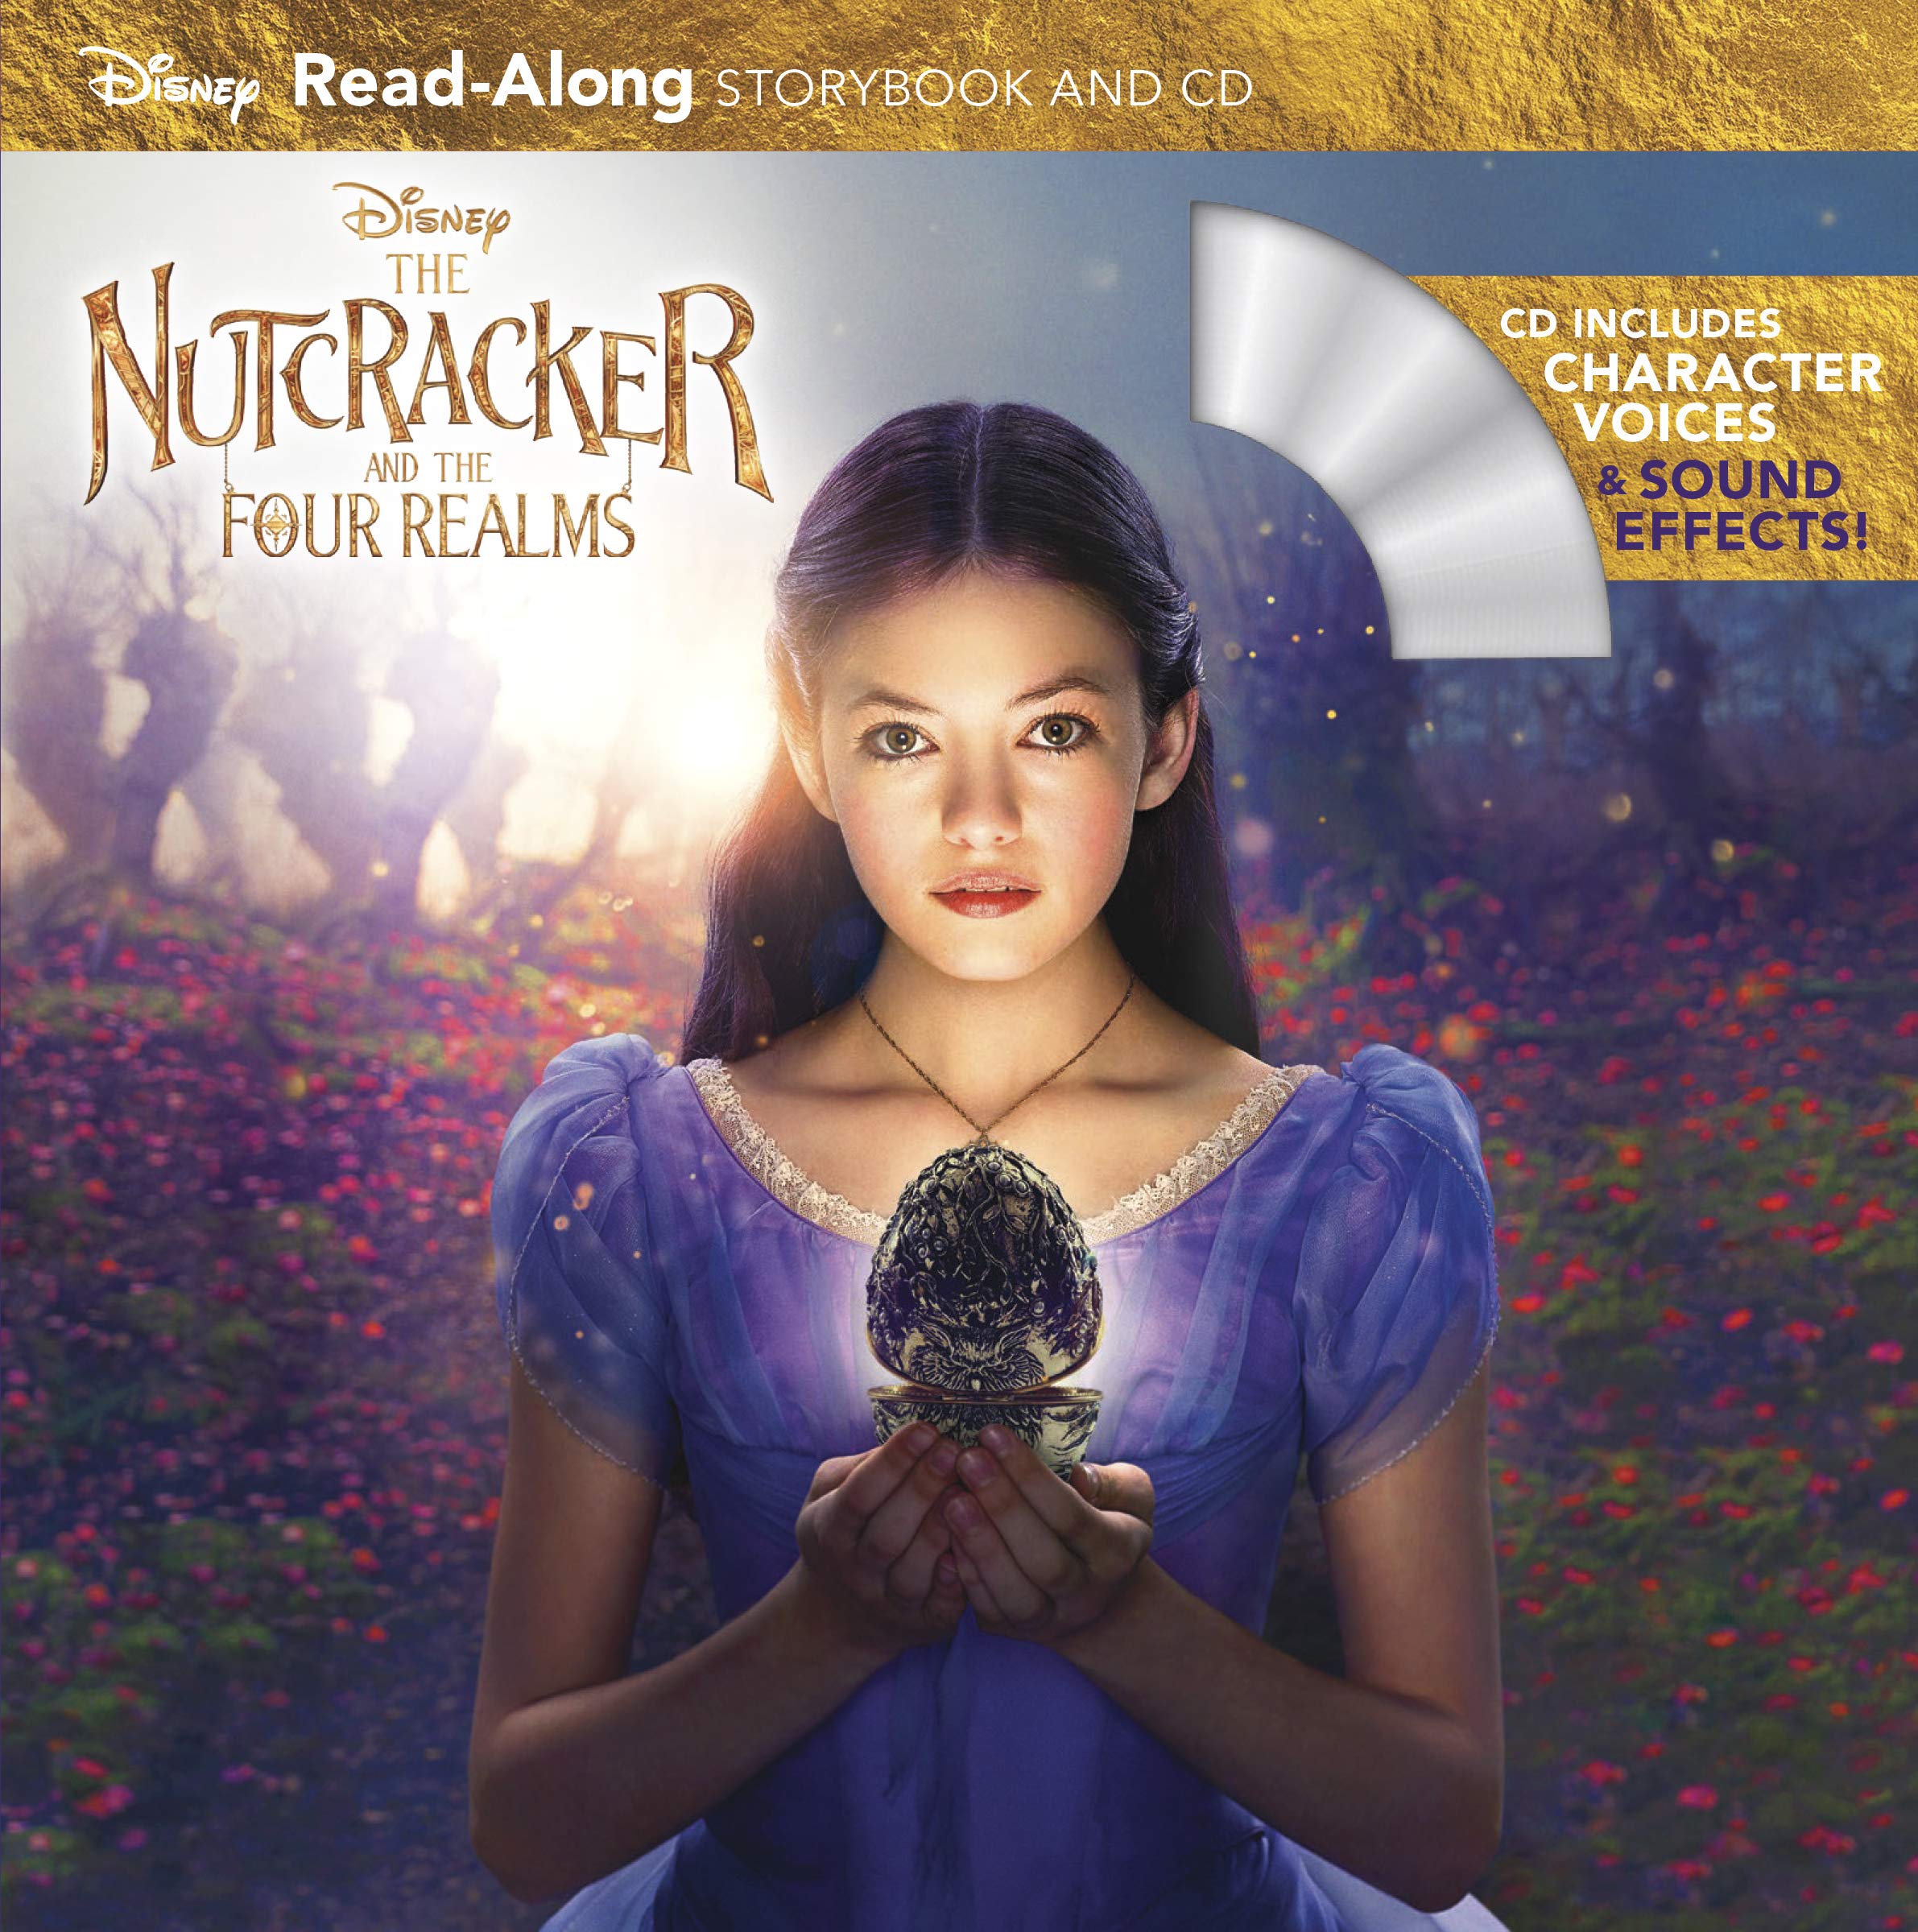 The Nutcracker and the Four Realms image The Nutcracker and